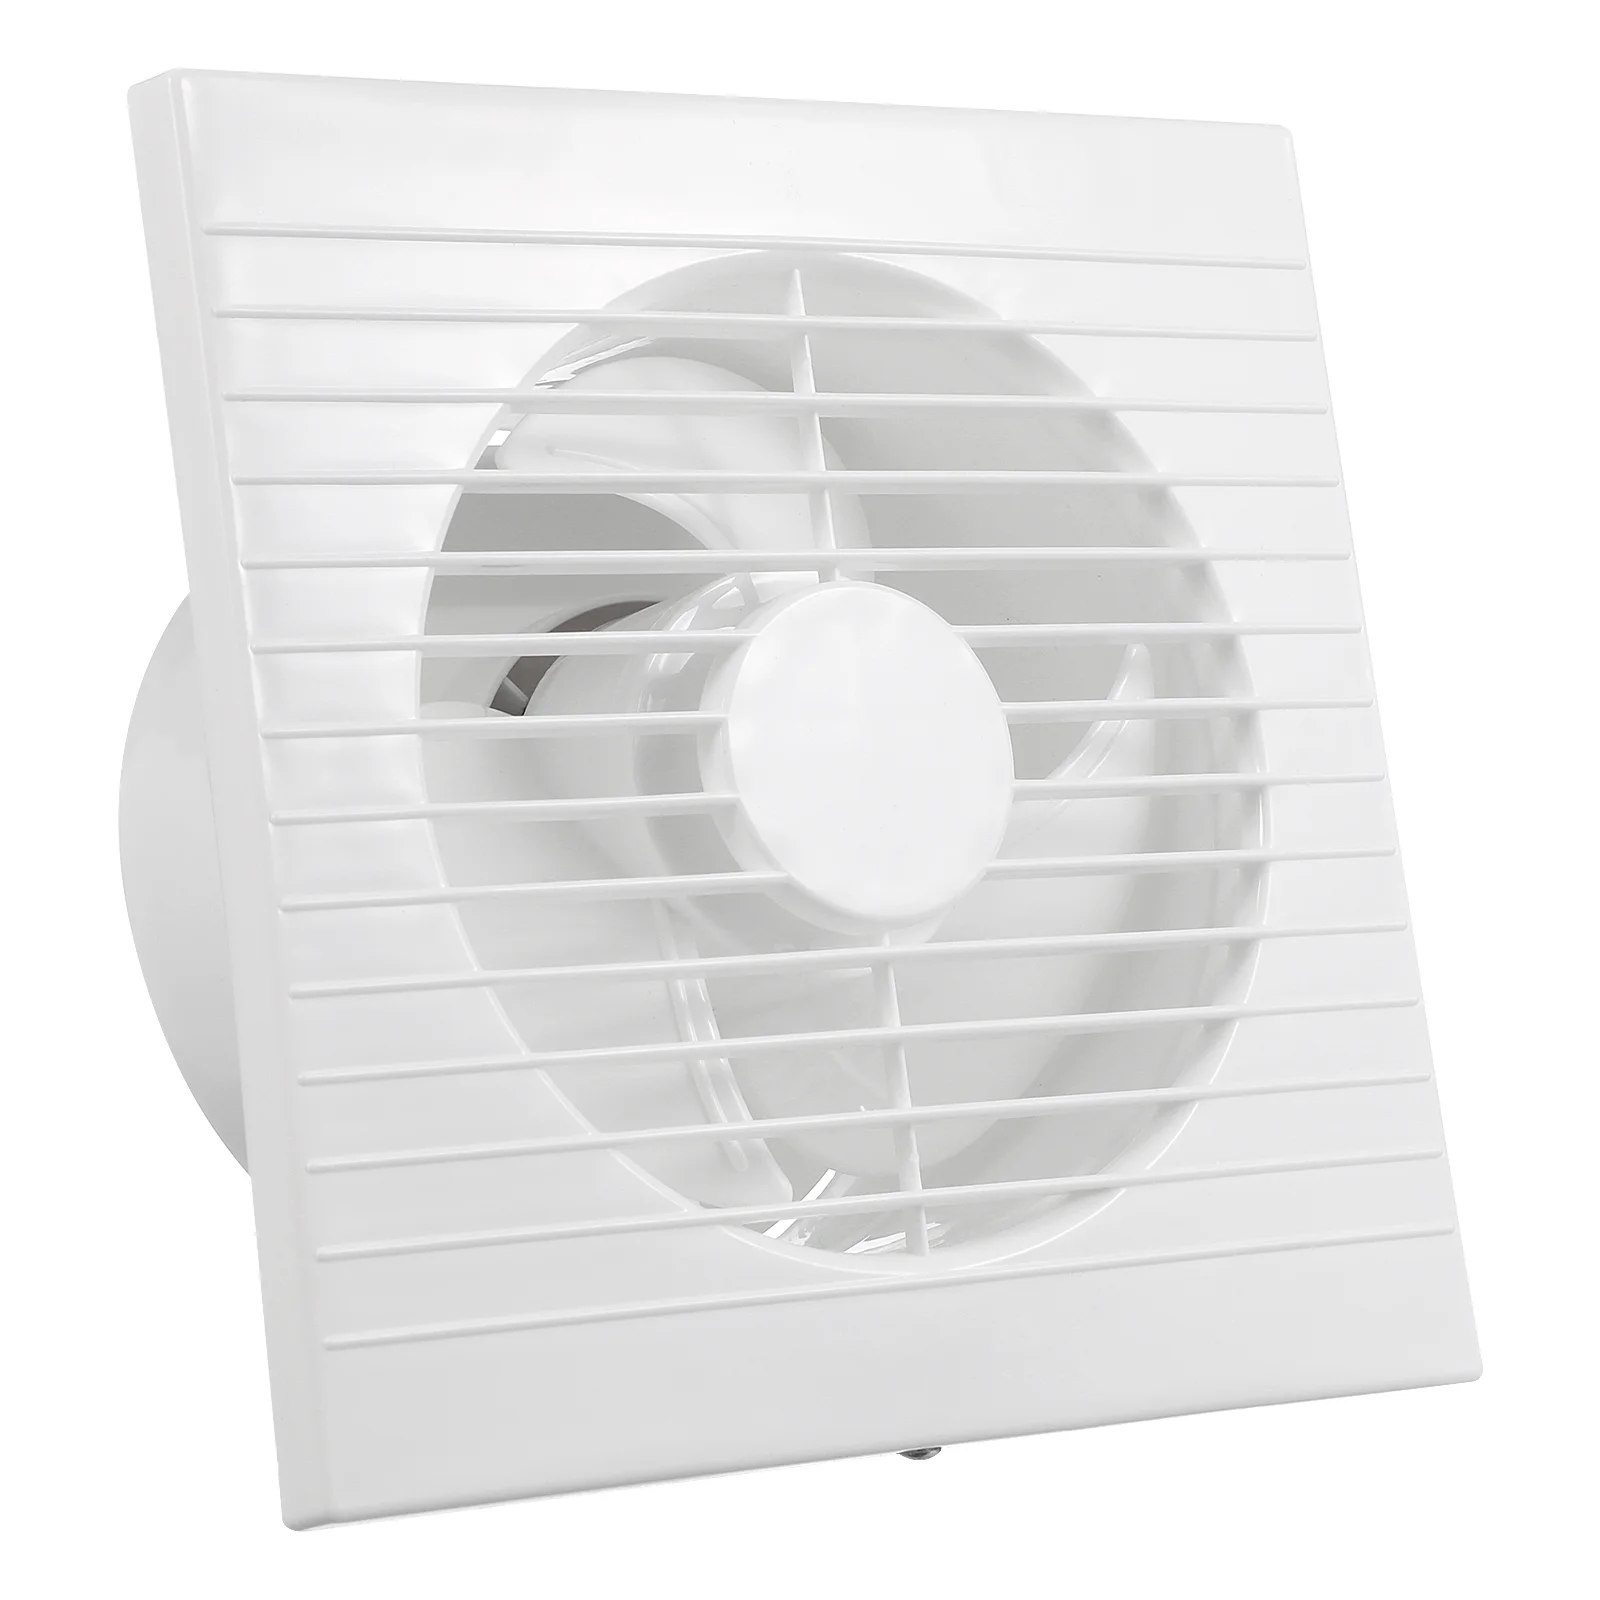 

Exhaust Fan 4 Inches 12 Meters Cable 110v Plug Garage Office Through Wall Attic Bathroom Air Vent Ventilation Mounted